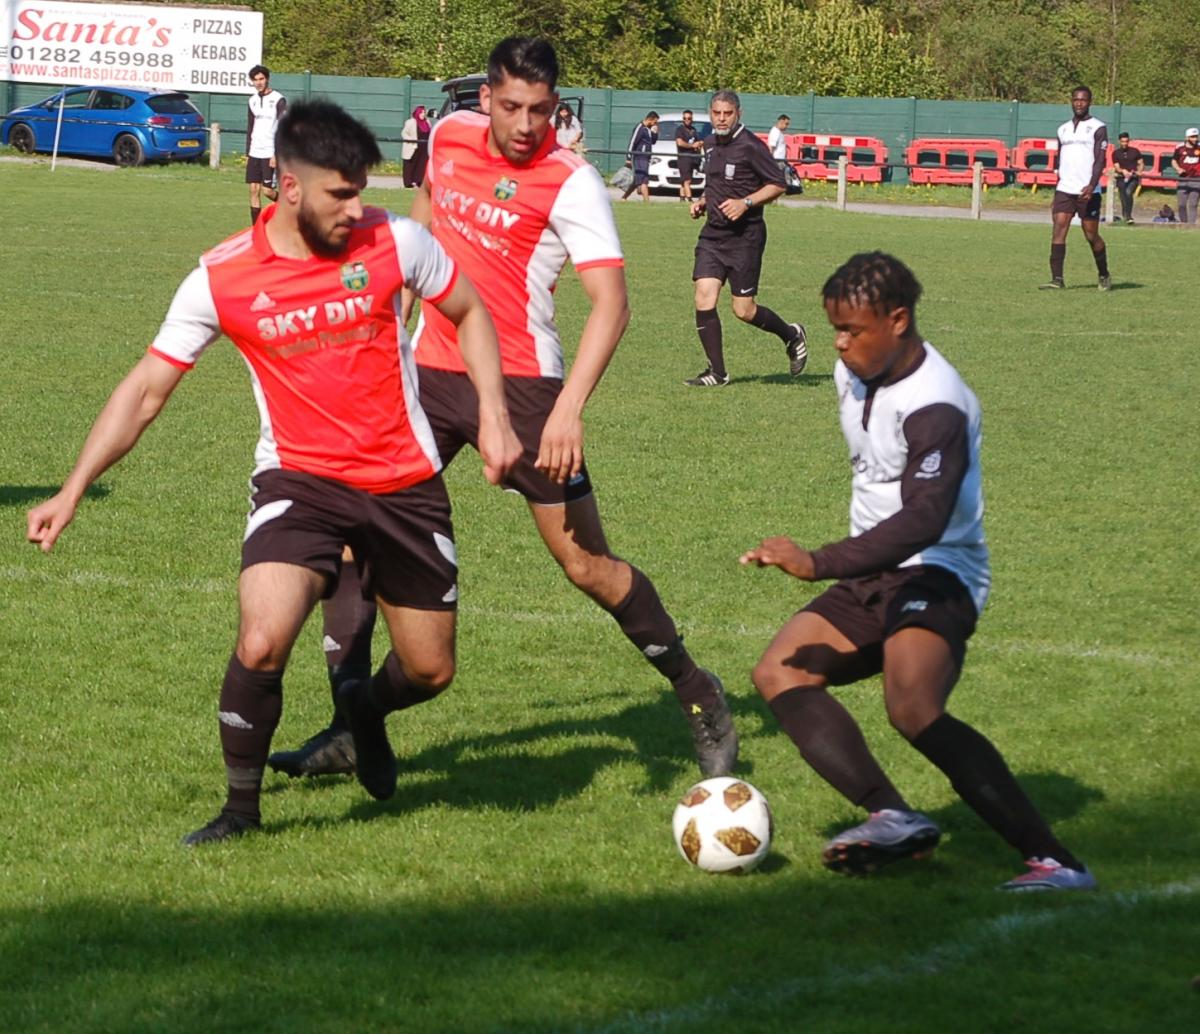 AMT Lawyers Football Championships 2018 quarter-final pictures. Games played at Victoria Park, Nelson FC